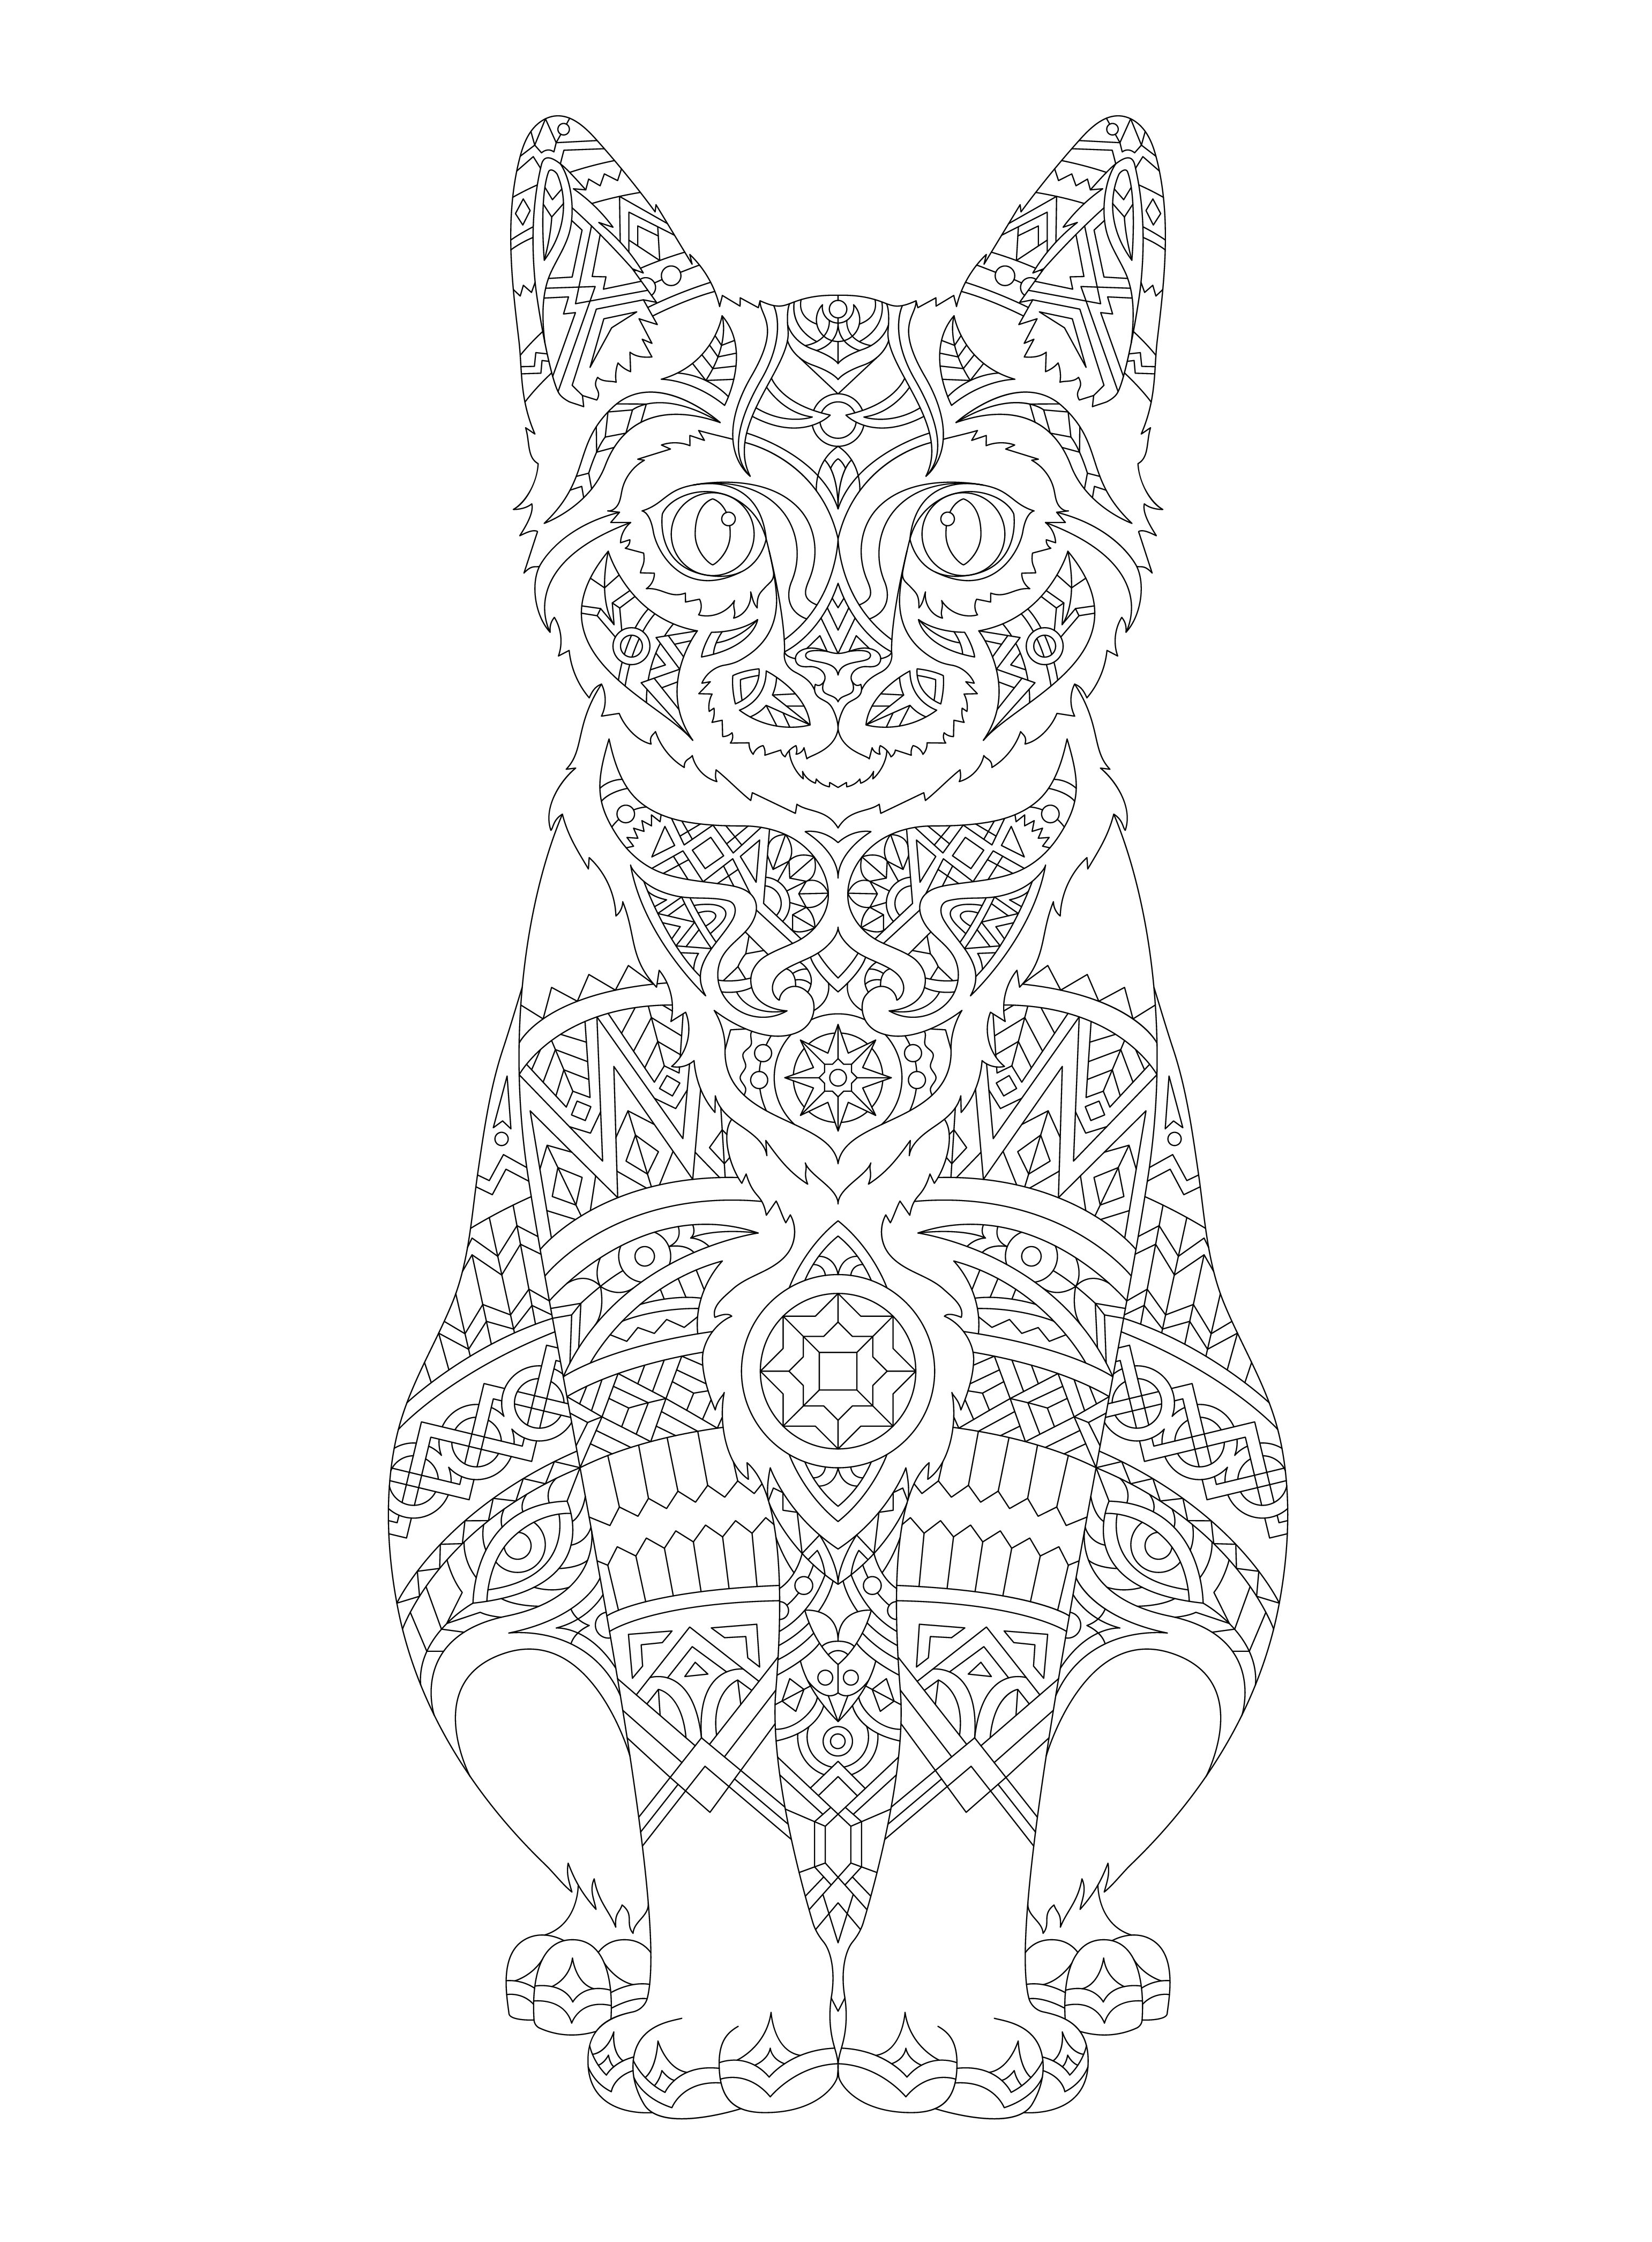 Illustration of animal adult coloring page - Download Free Vectors, Clipart Graphics & Vector Art